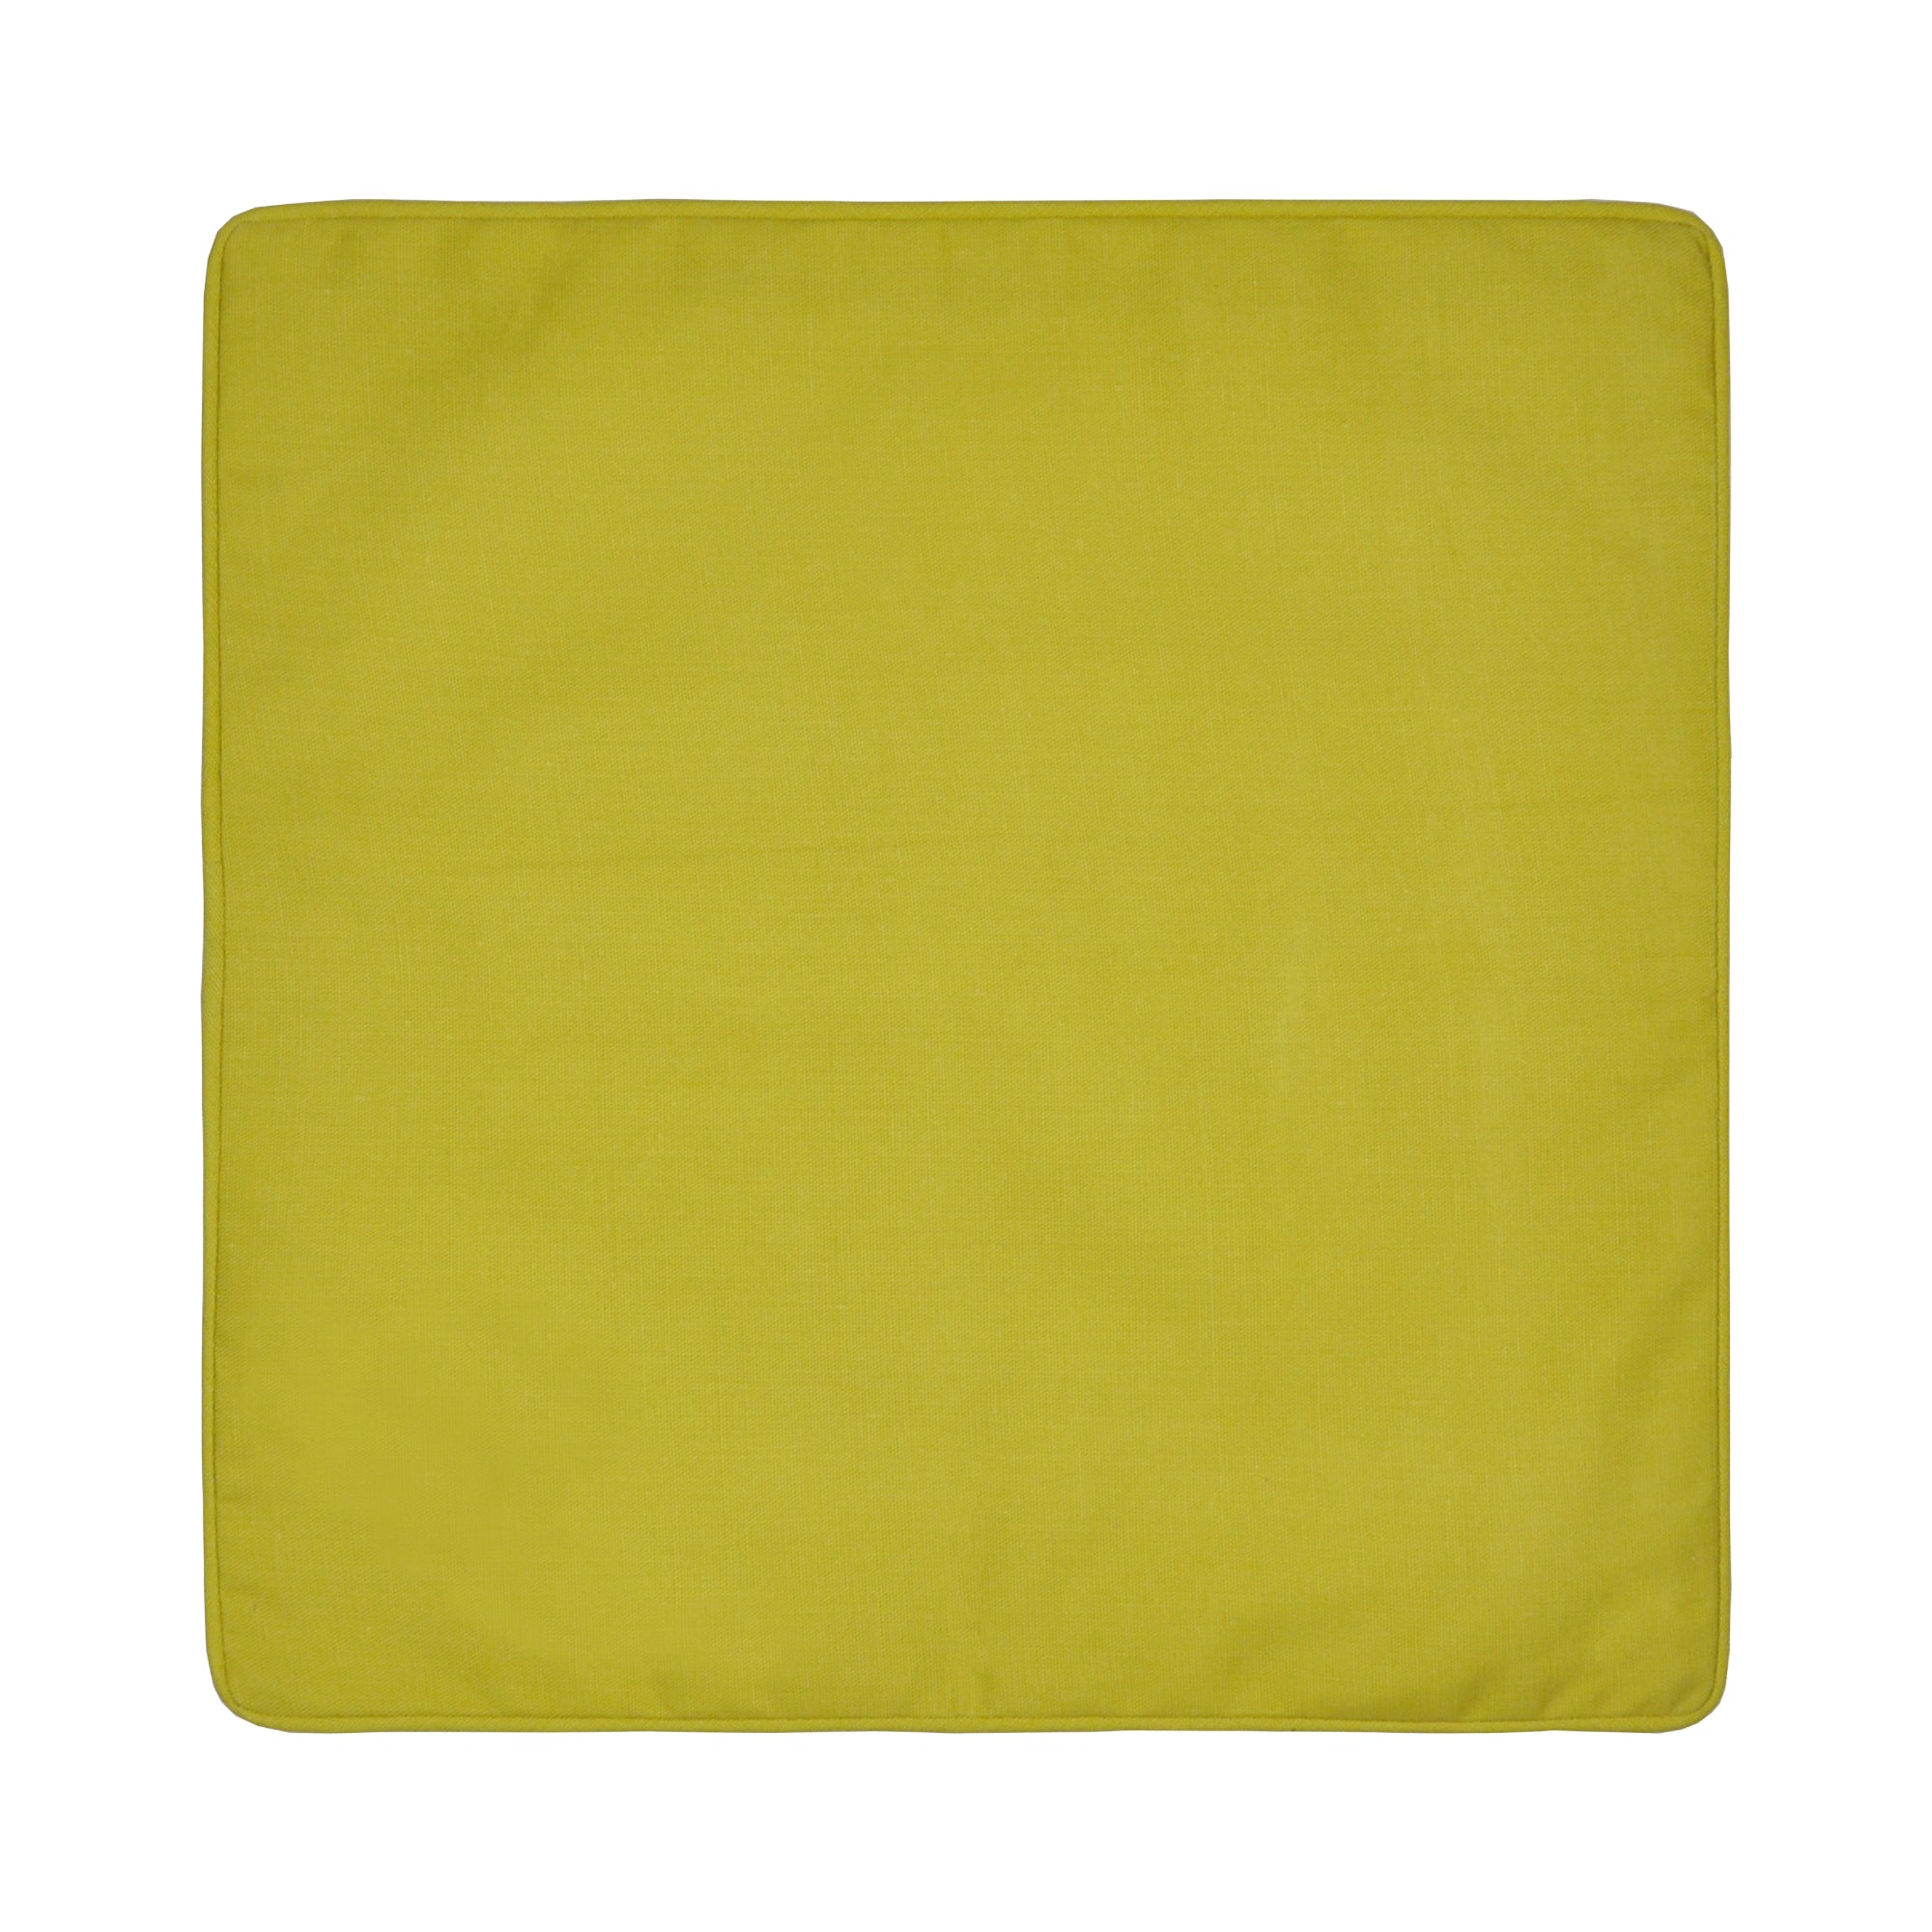 Filled Outdoor Cushion Plain Dye by Fusion in Ochre